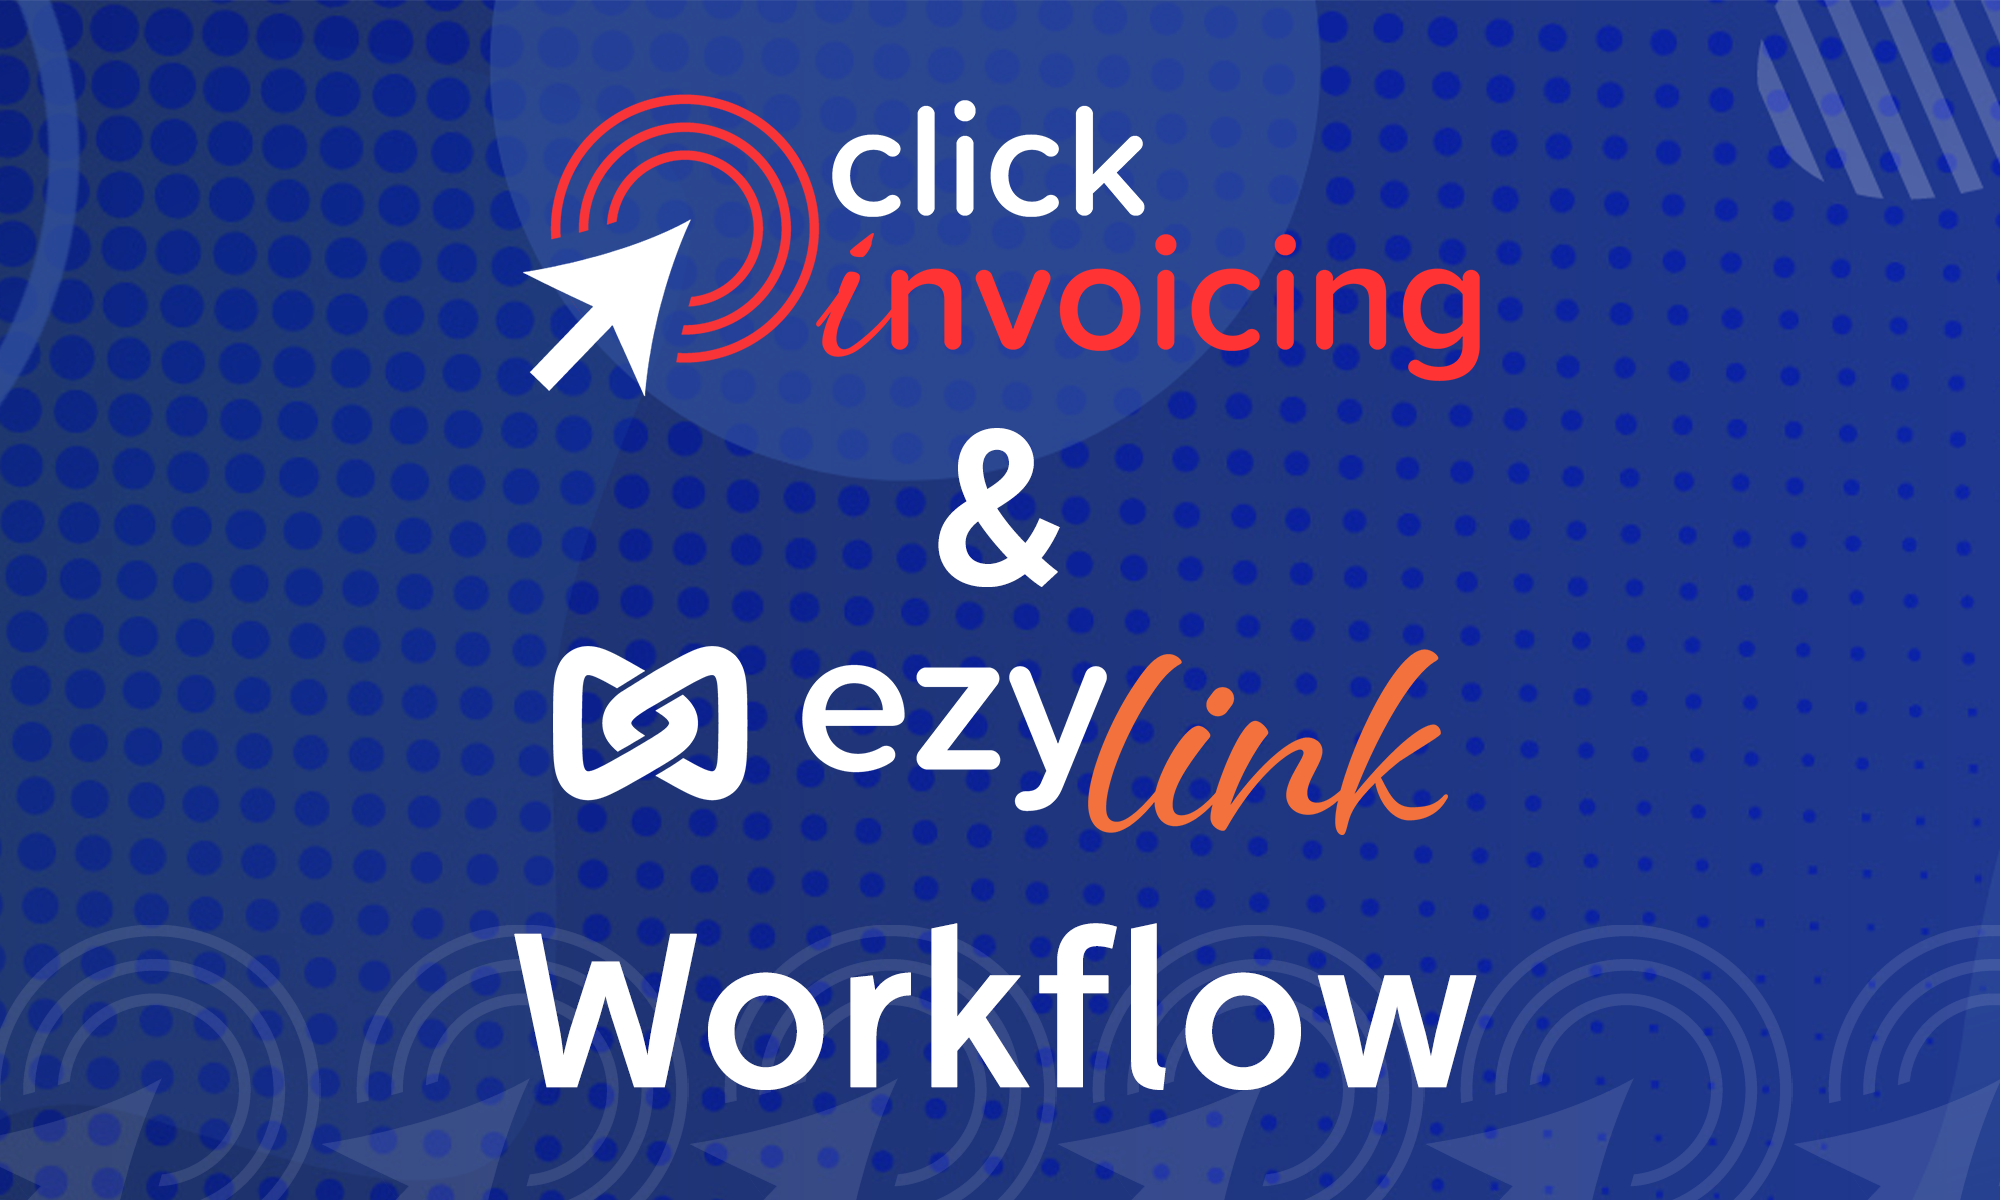 Featured image for “Click Invoicing & Ezylink Workflow”